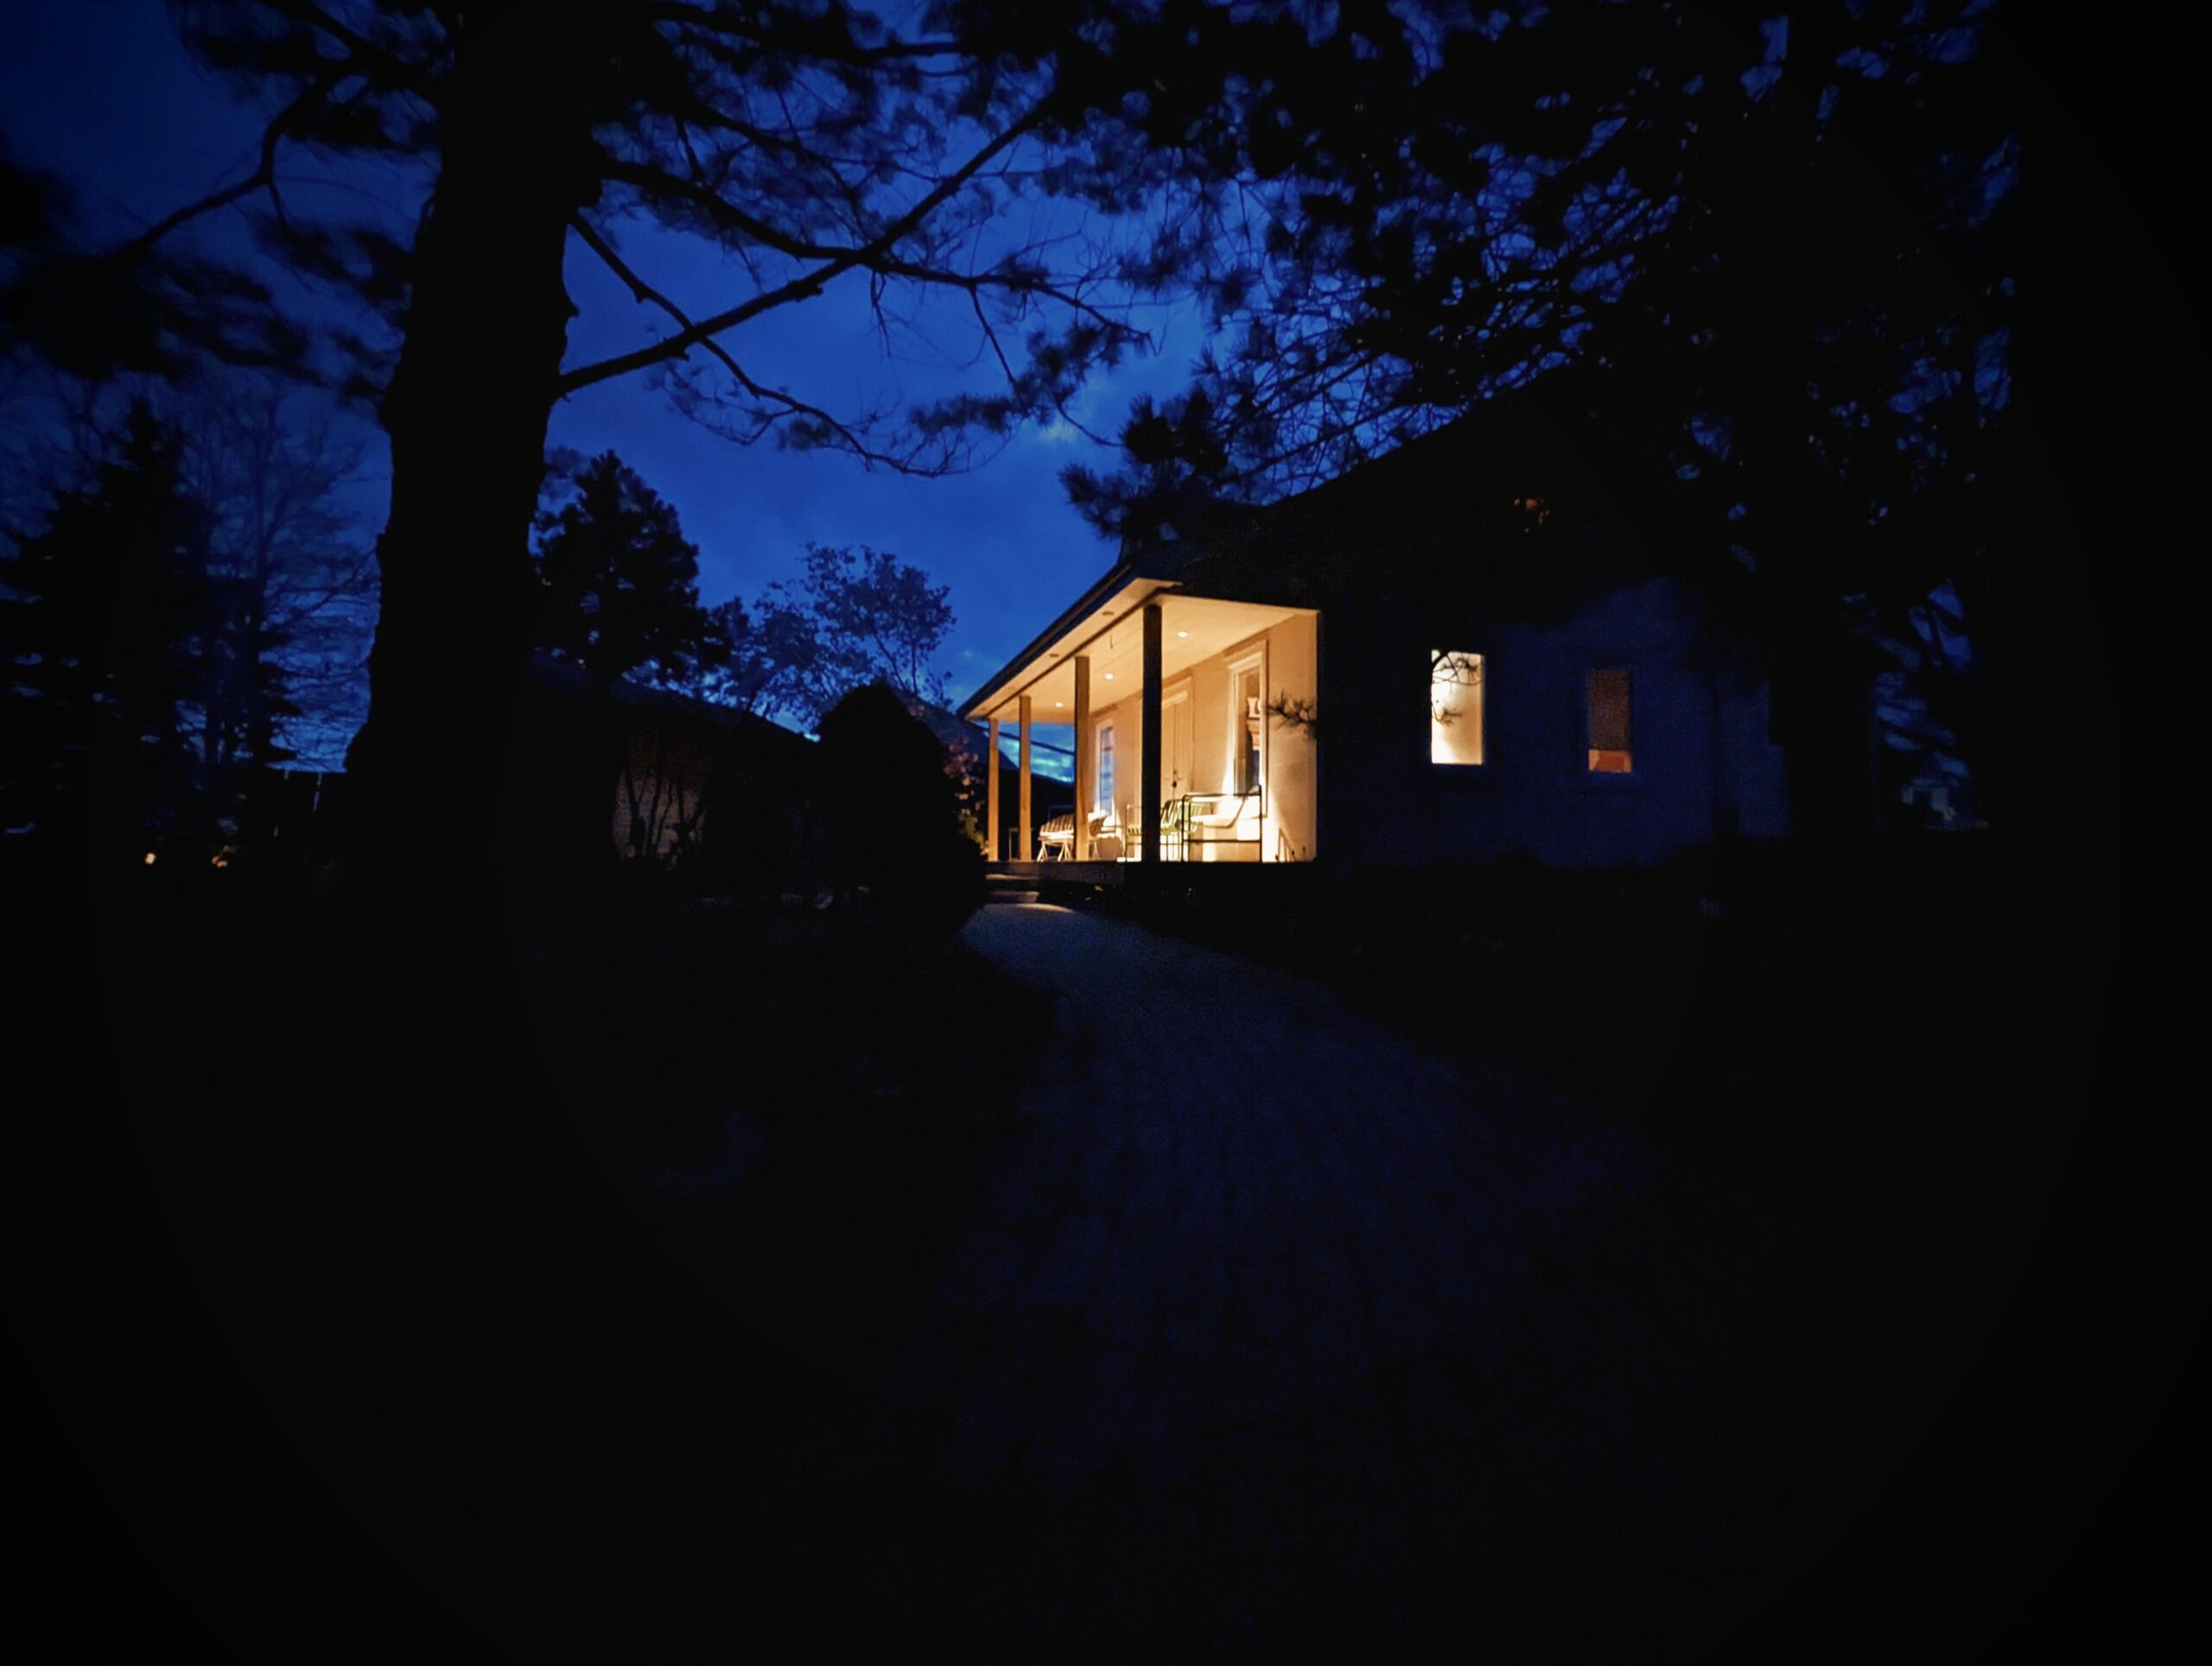 Dark night with lit up cabin front steps